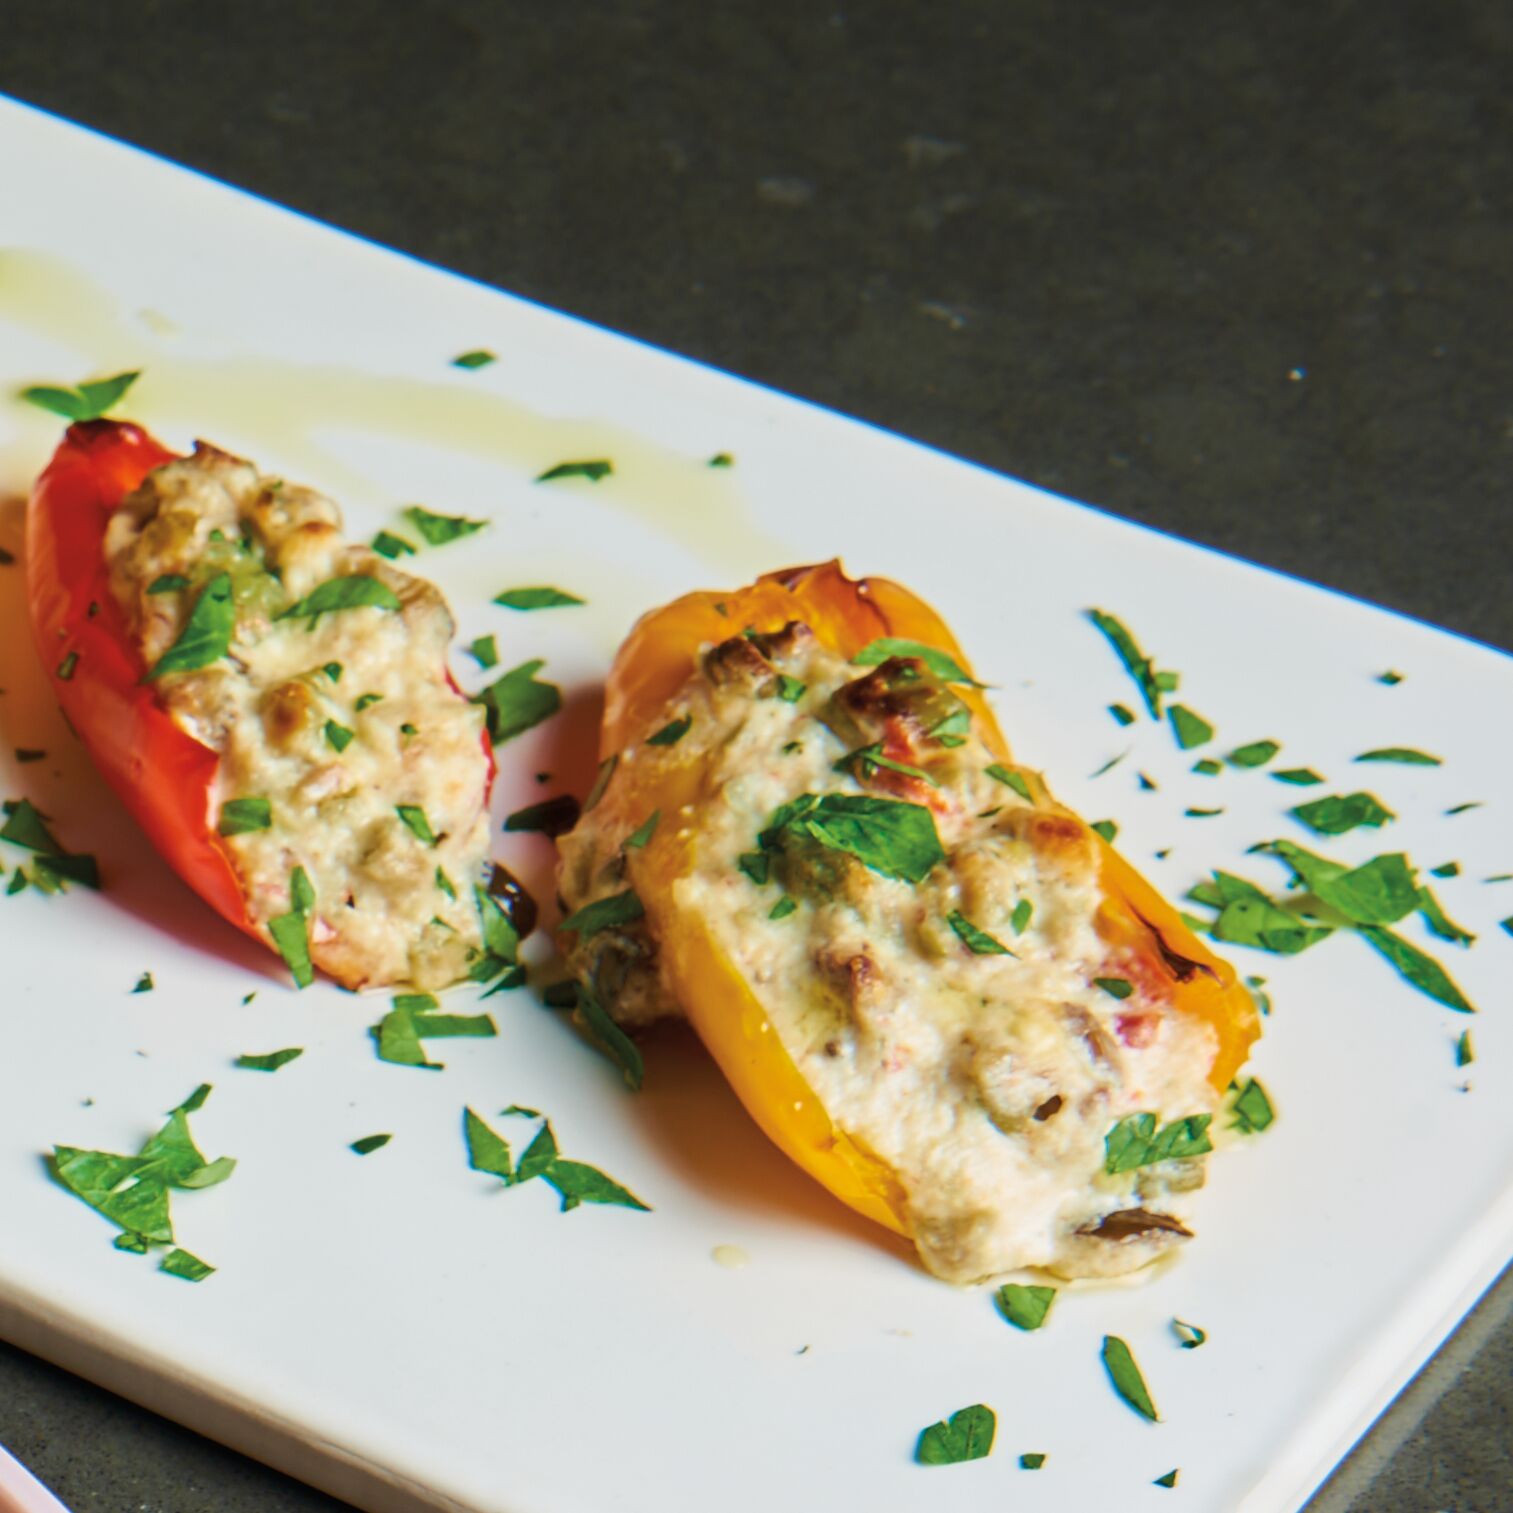 Red and yellow mini bell peppers stuffed with ricotta and olive tapenade mixture, garnished with chopped parsley on a white rectangular plate